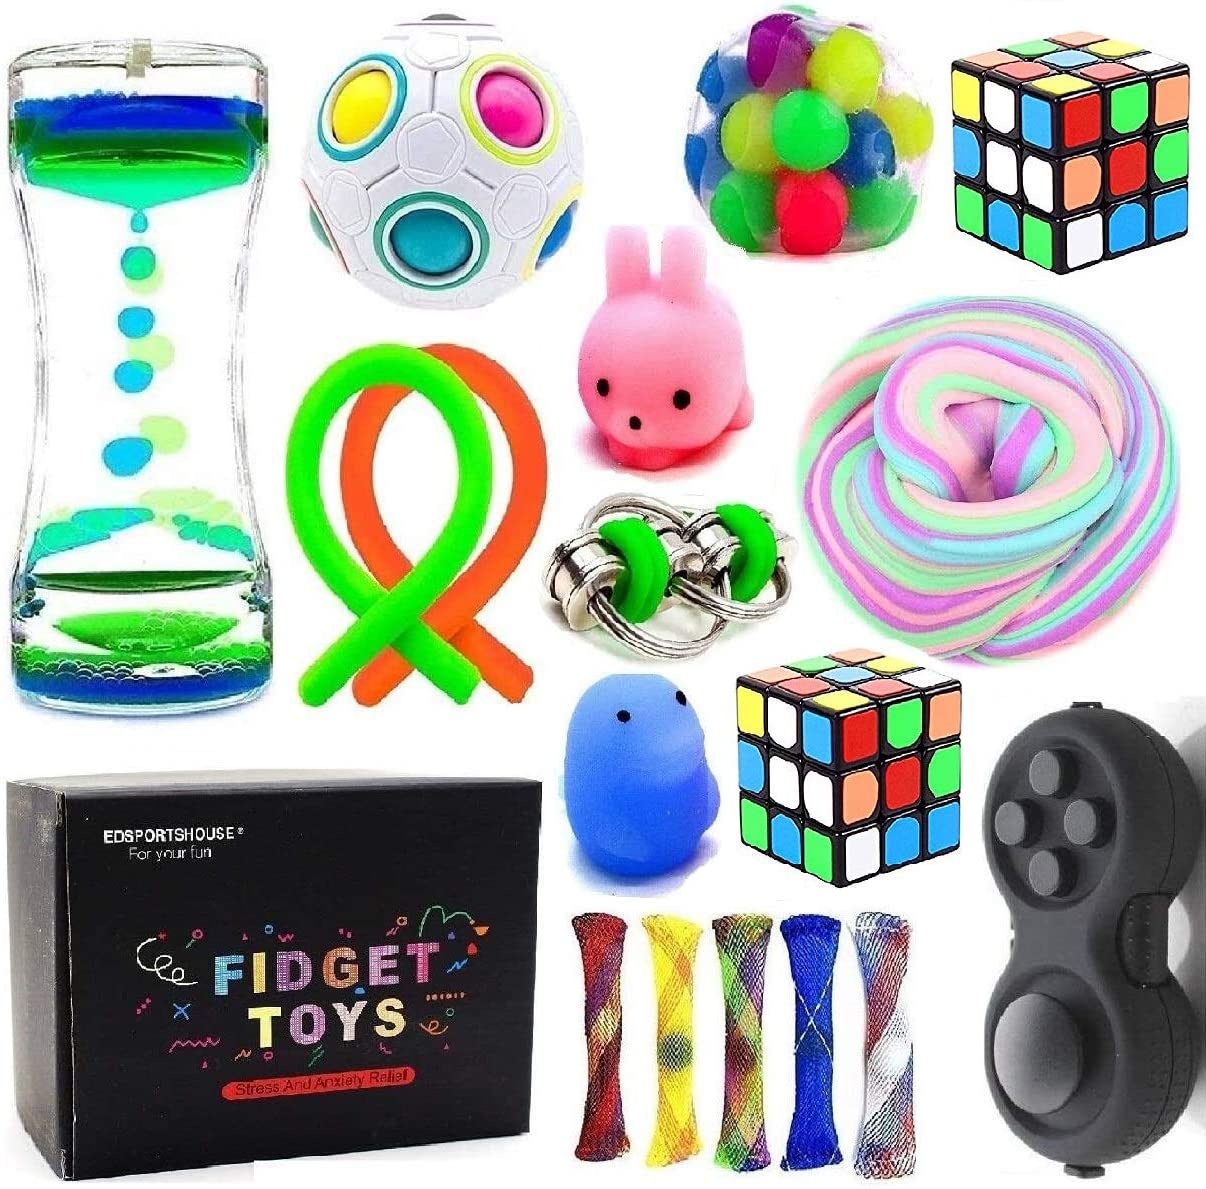 A Pop It Toddler Fidget Toy Push Pop Bubble Fidget Sensory Toy Autism Stress Relief Irritability Anti-Anxiety Reliever Special Needs Supplies for Women Kids Teens Old Young Adult 